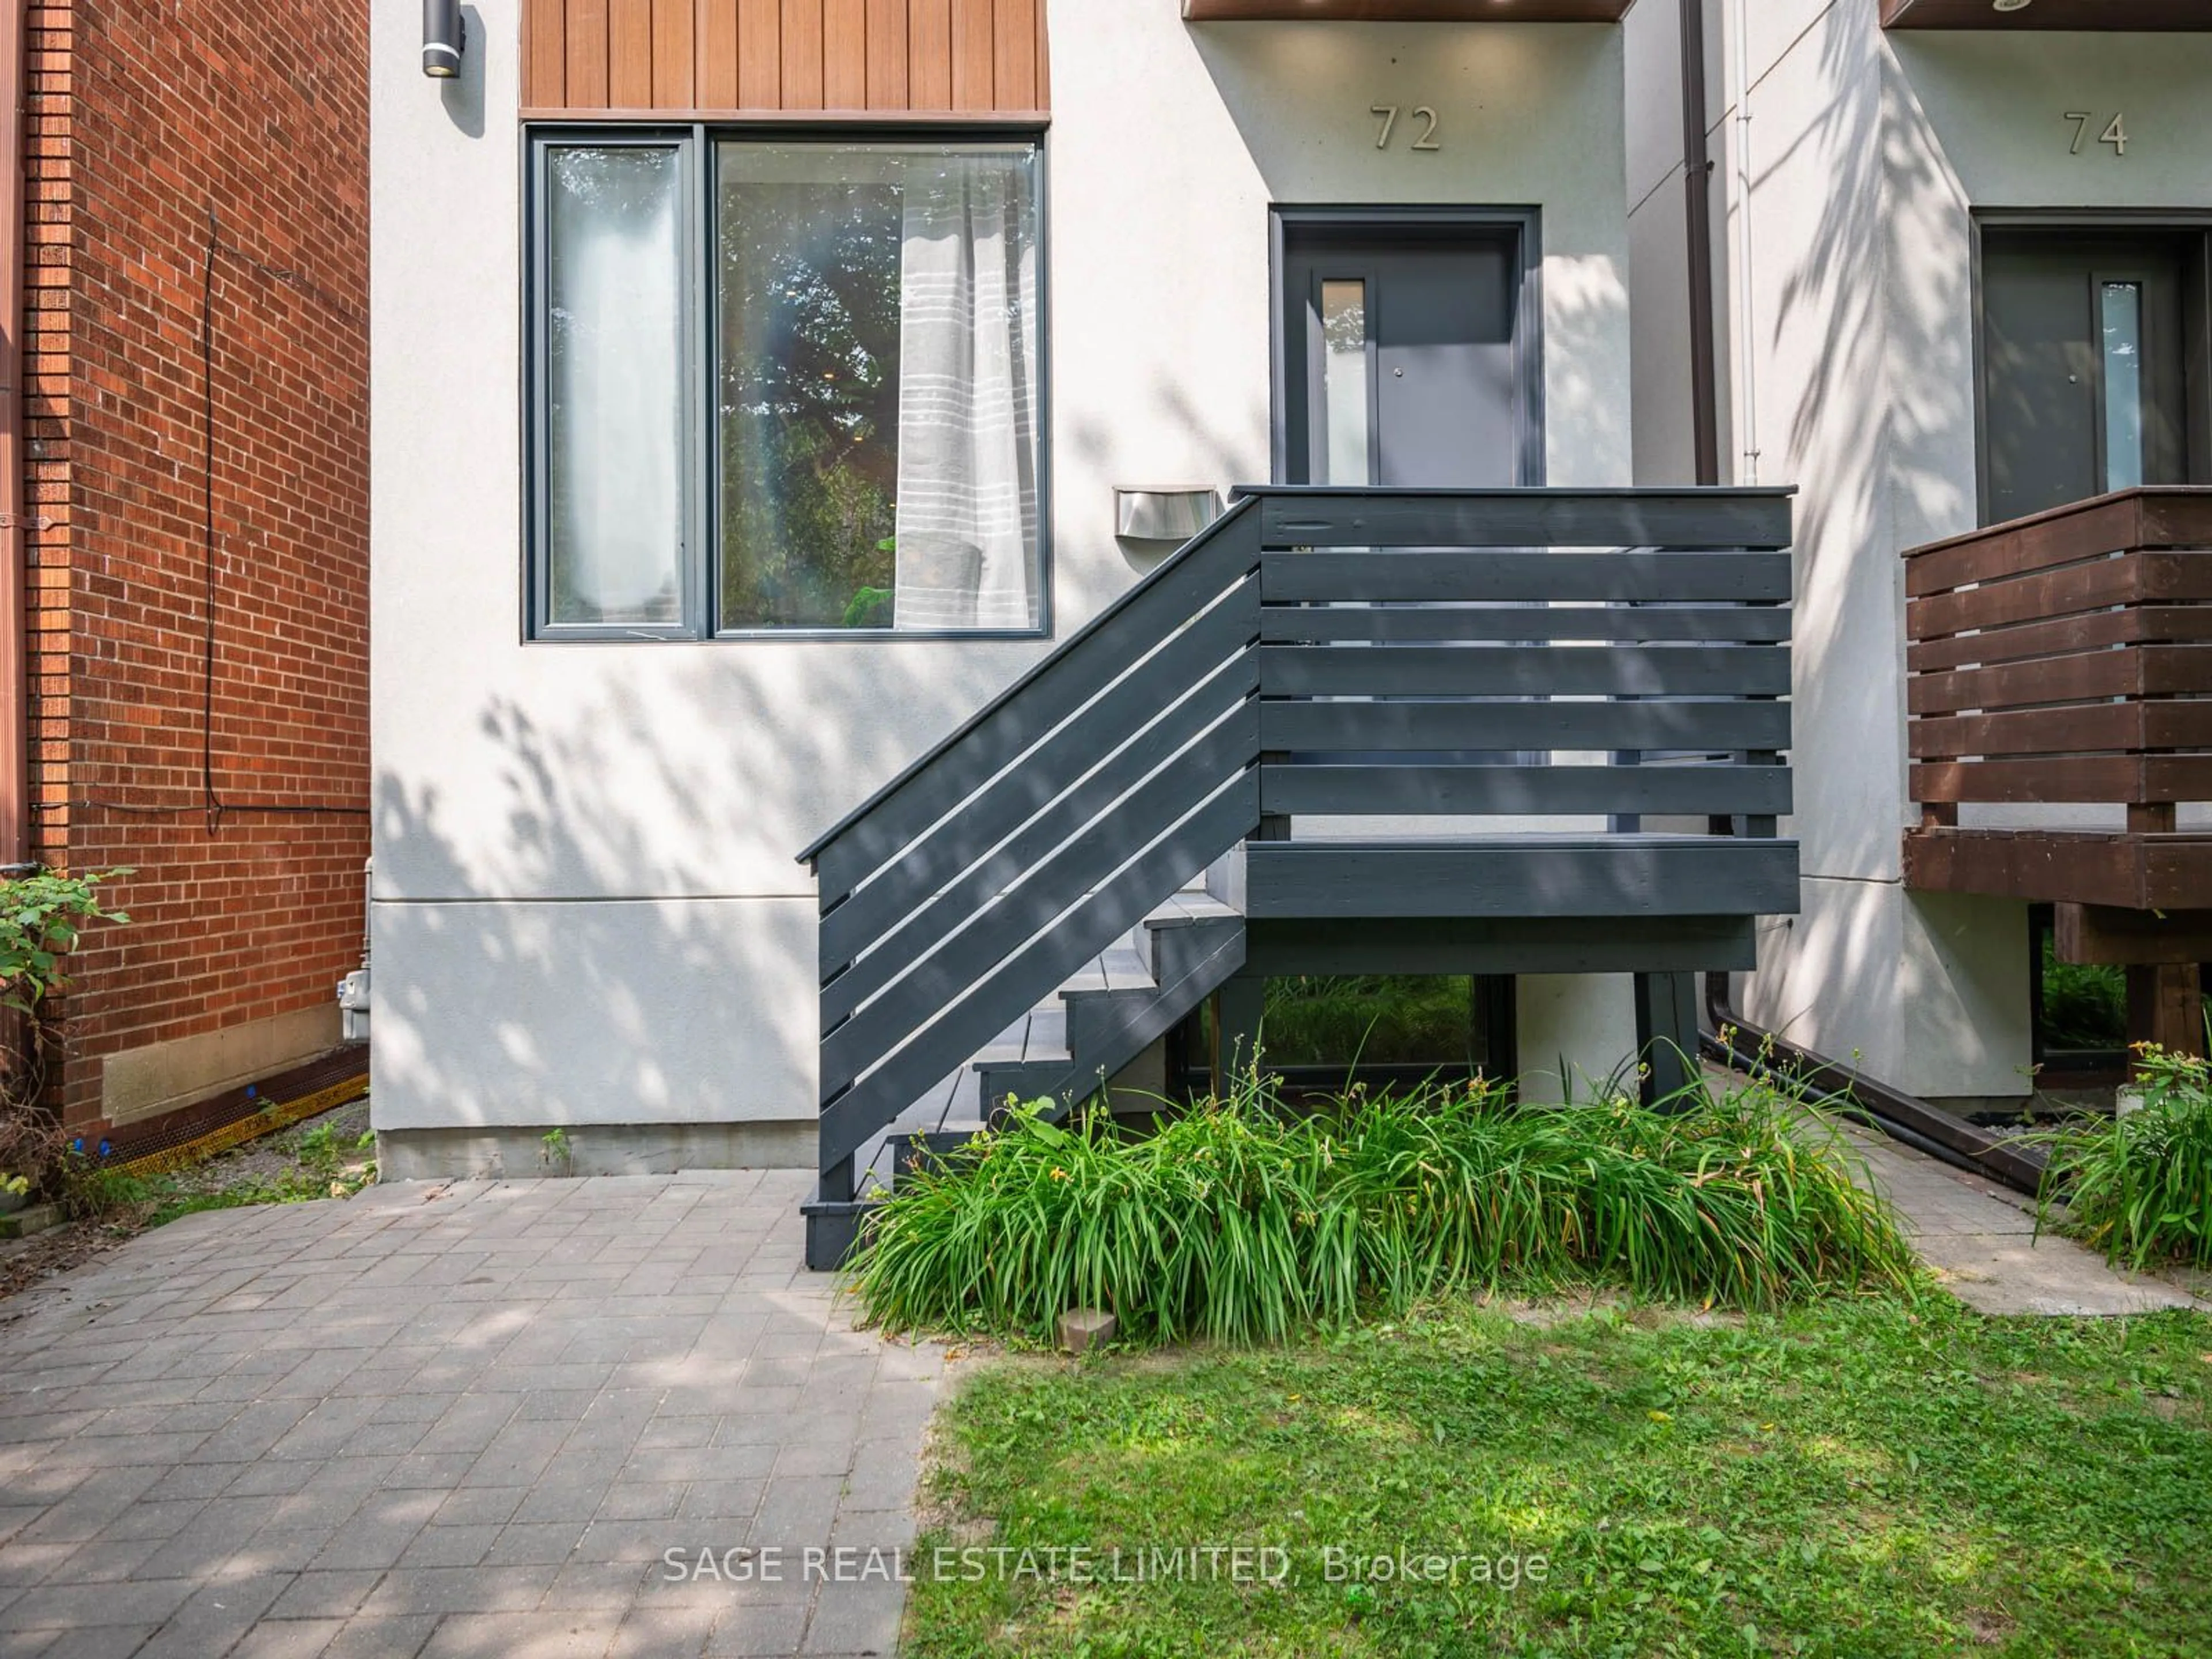 Home with brick exterior material for 72 Curzon St, Toronto Ontario M4M 3B4